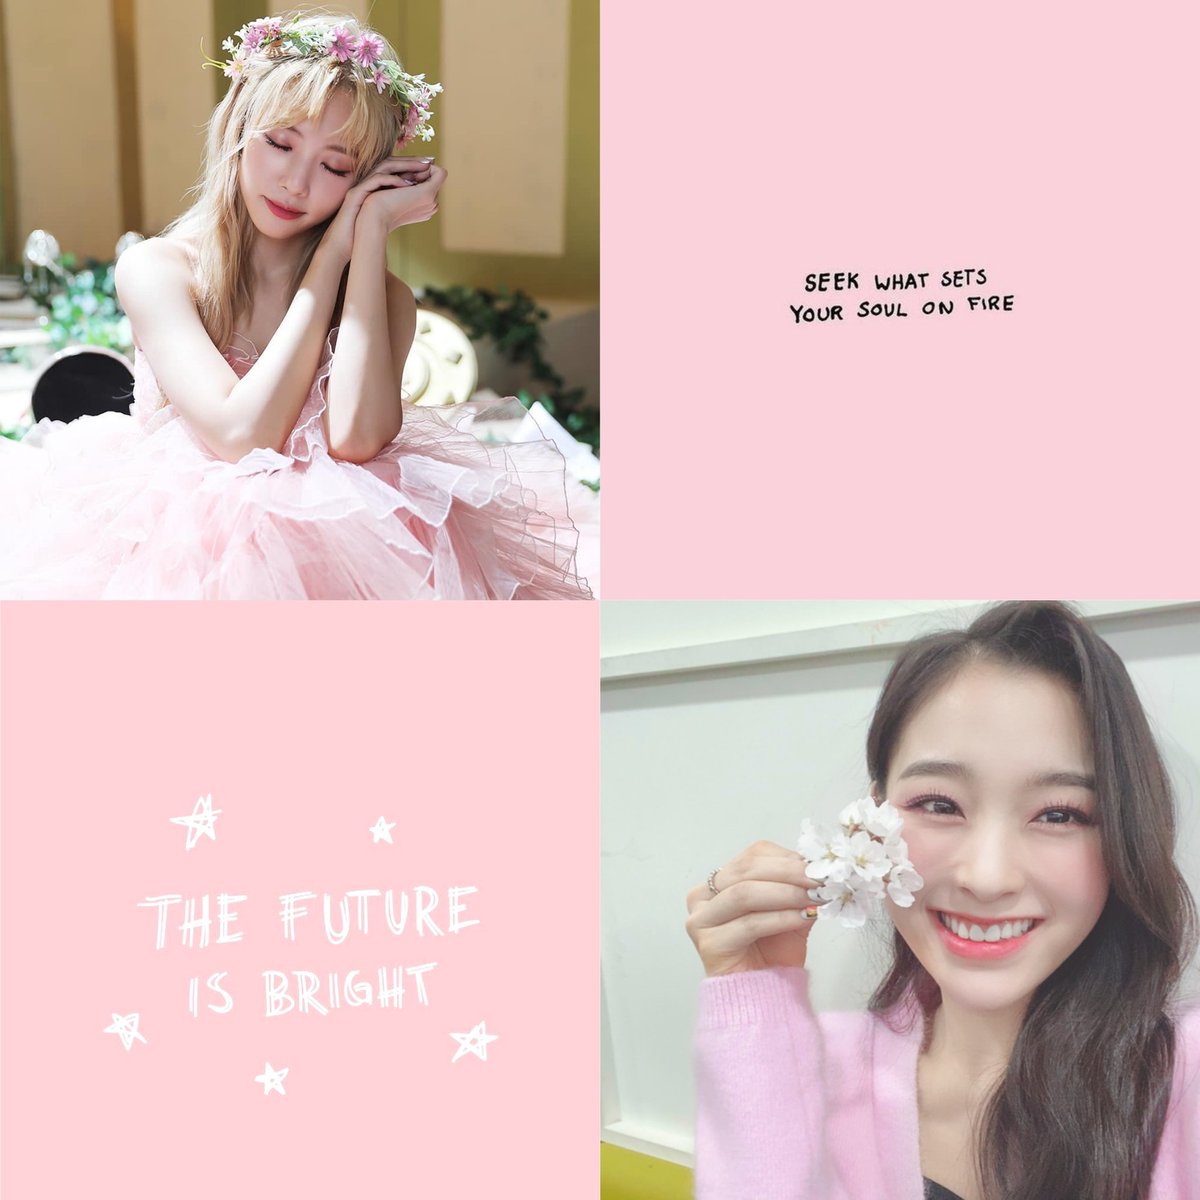 "now my voice is ringing loud so it can fill up the world"princess minji meets pauper gahyeon in the garden at night, which turns into a regular occurrence. during their secret talks, minji slowly learns the truth about the country, her own dreams and love...